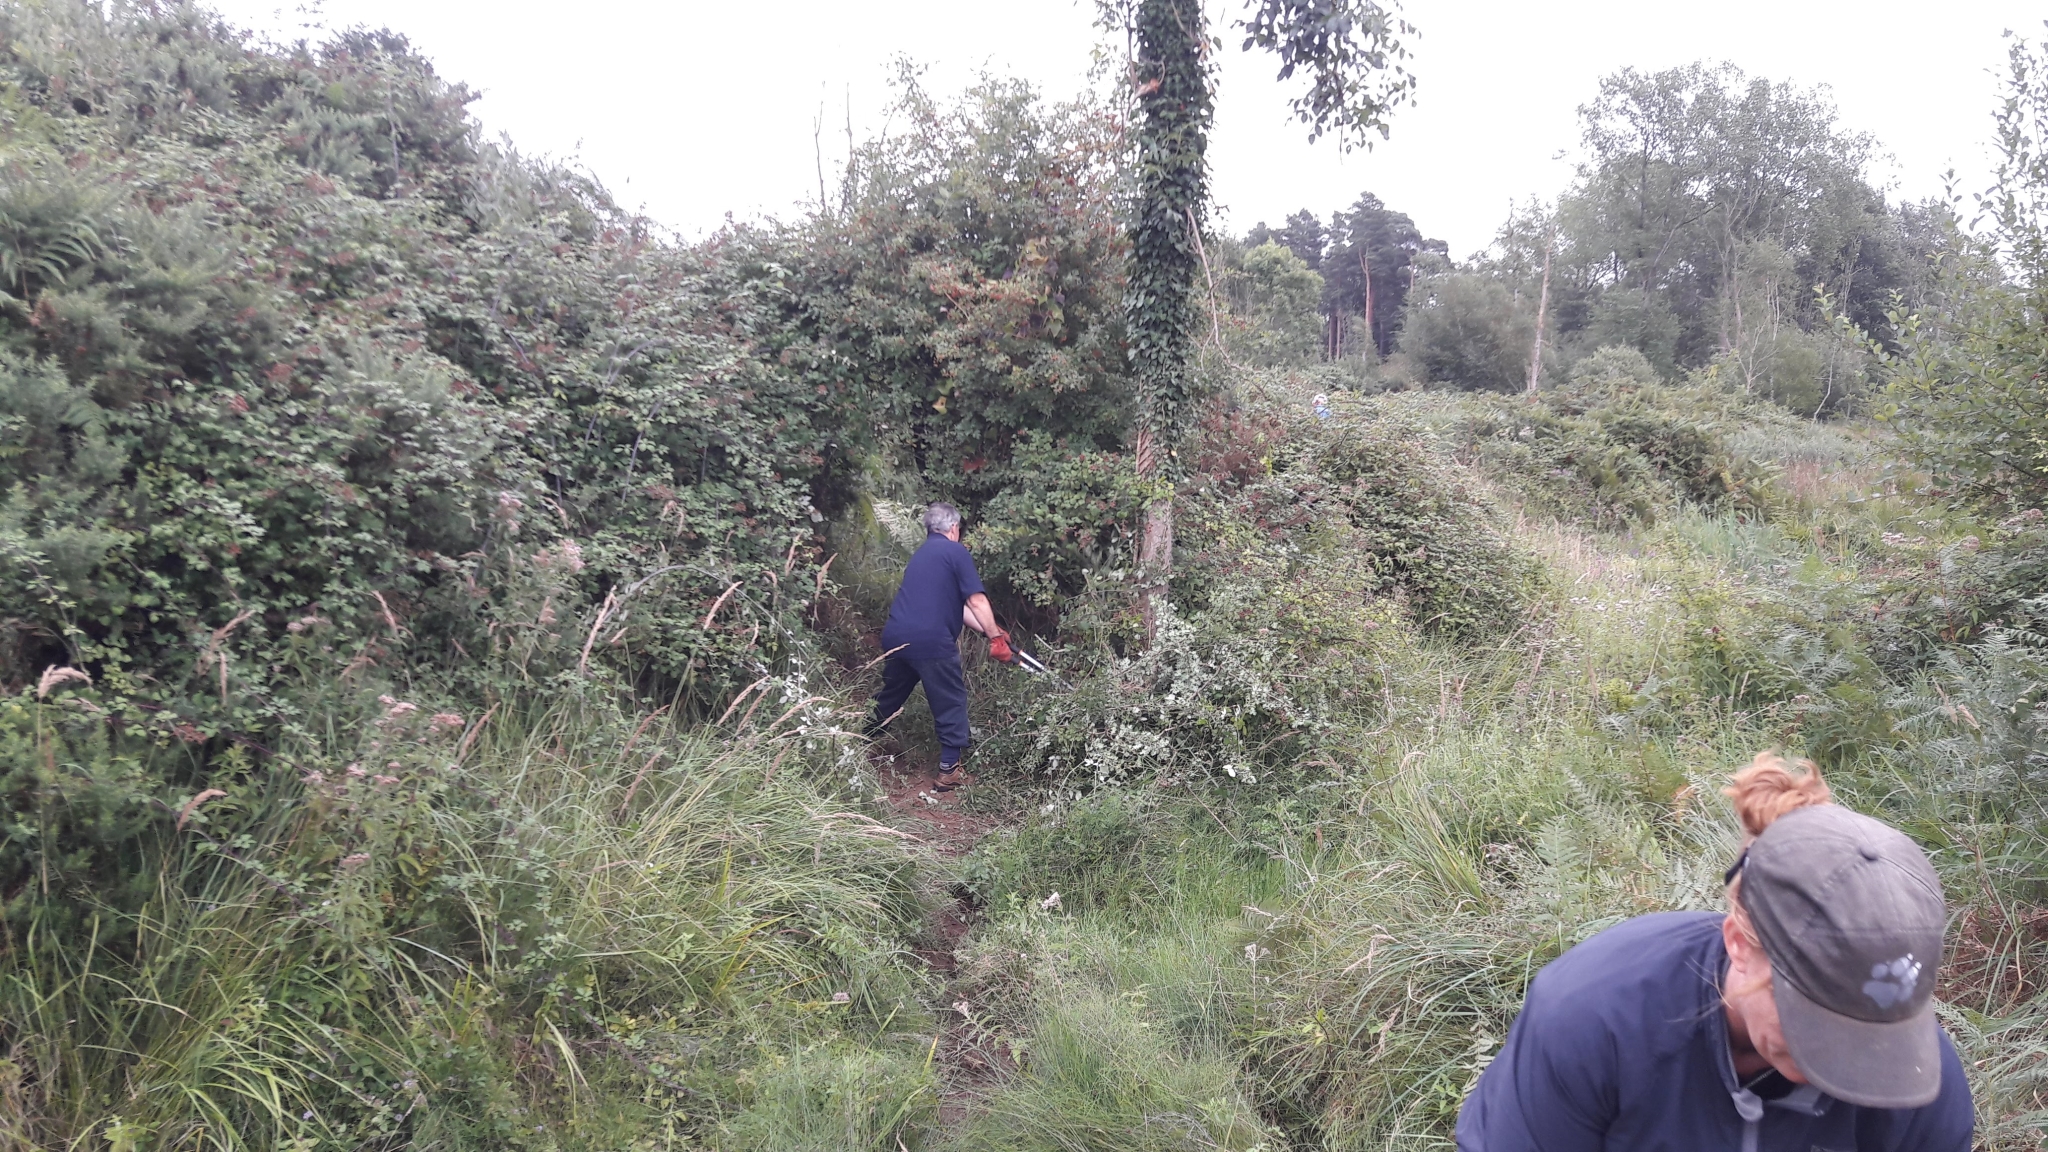 A photo from the FoTF Conservation Event - August 2018 - Gorse Removal at Hockham Hills & Holes : Volunteers at work amongst the vegetation